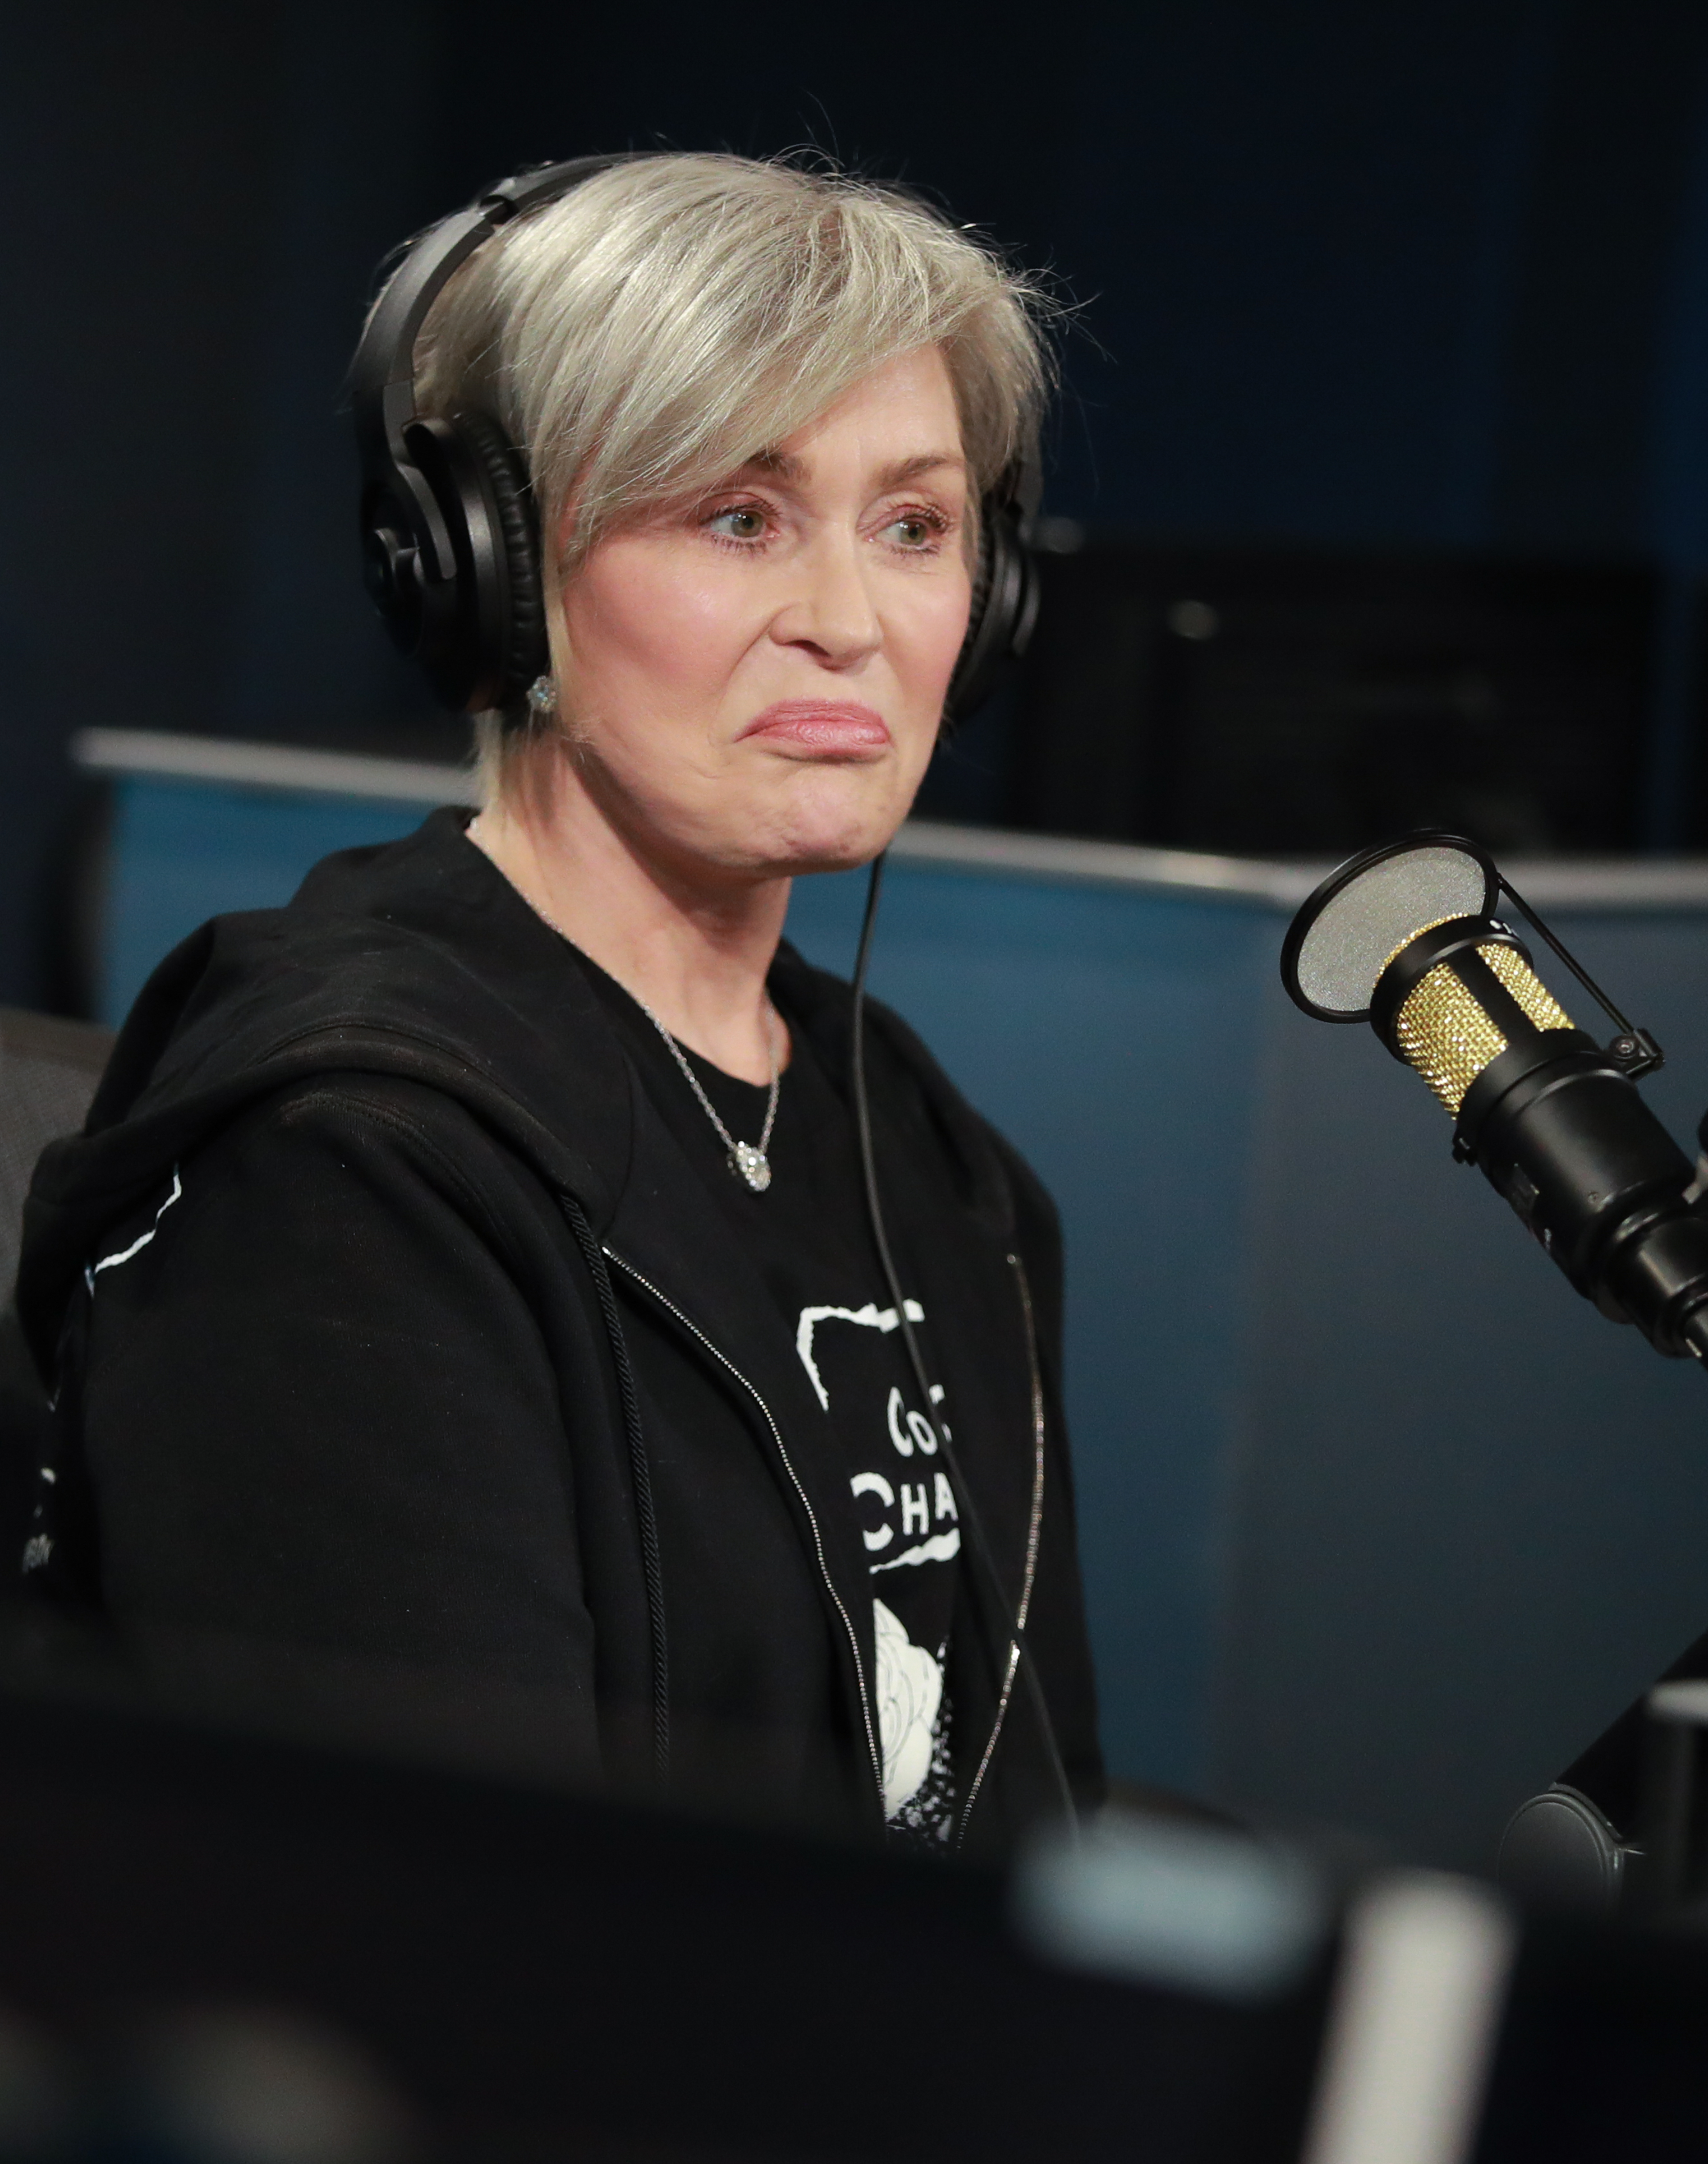 Close-up of Sharon seated in front of a microphone and wearing headphones